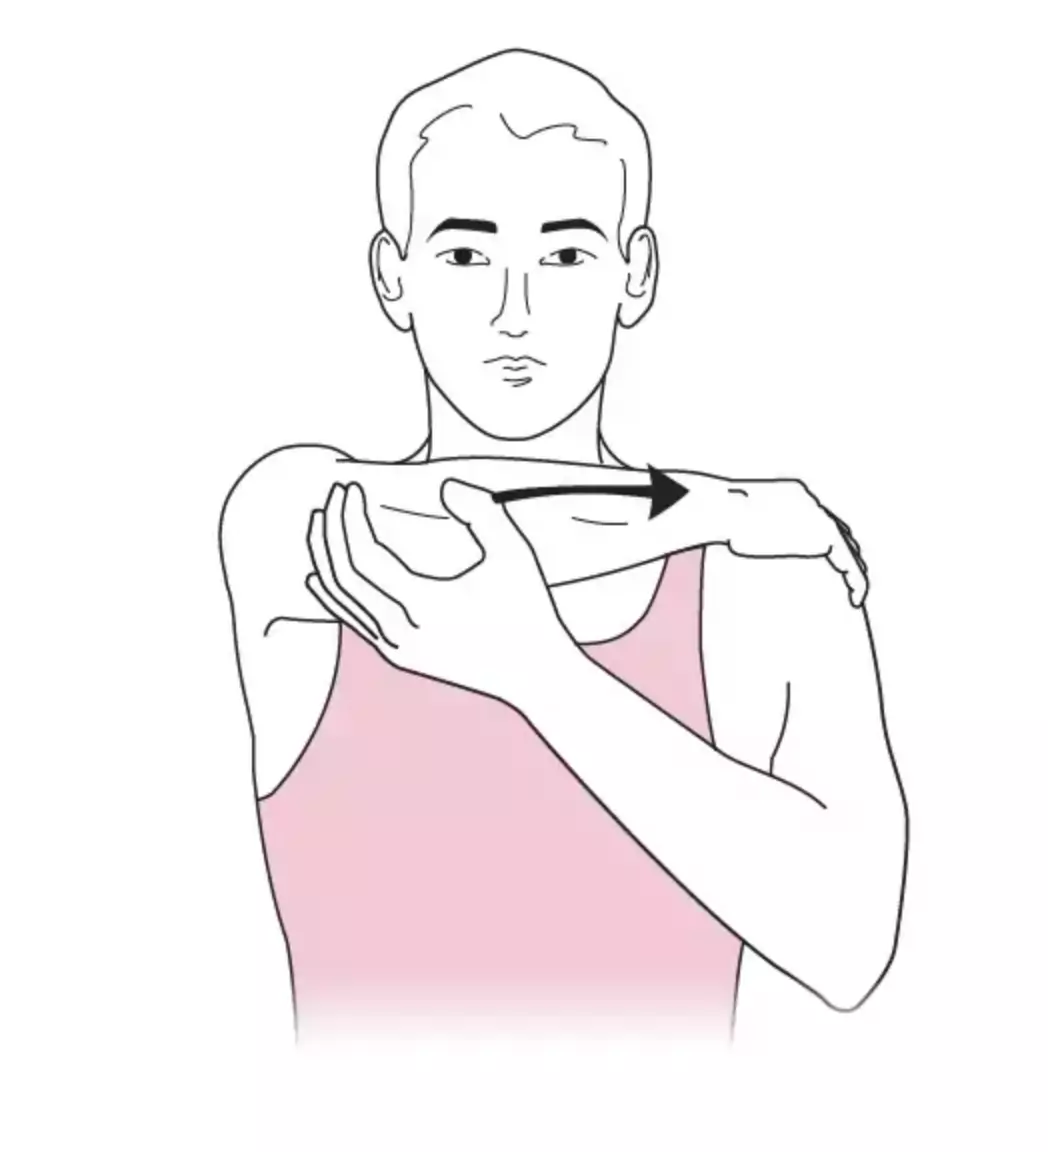 Internal rotation stretch: sitting or standing, place the hand of the affected arm on the healthy shoulder, with the arm crossed over the chest. Hold for 3 seconds. Repeat 5 times.